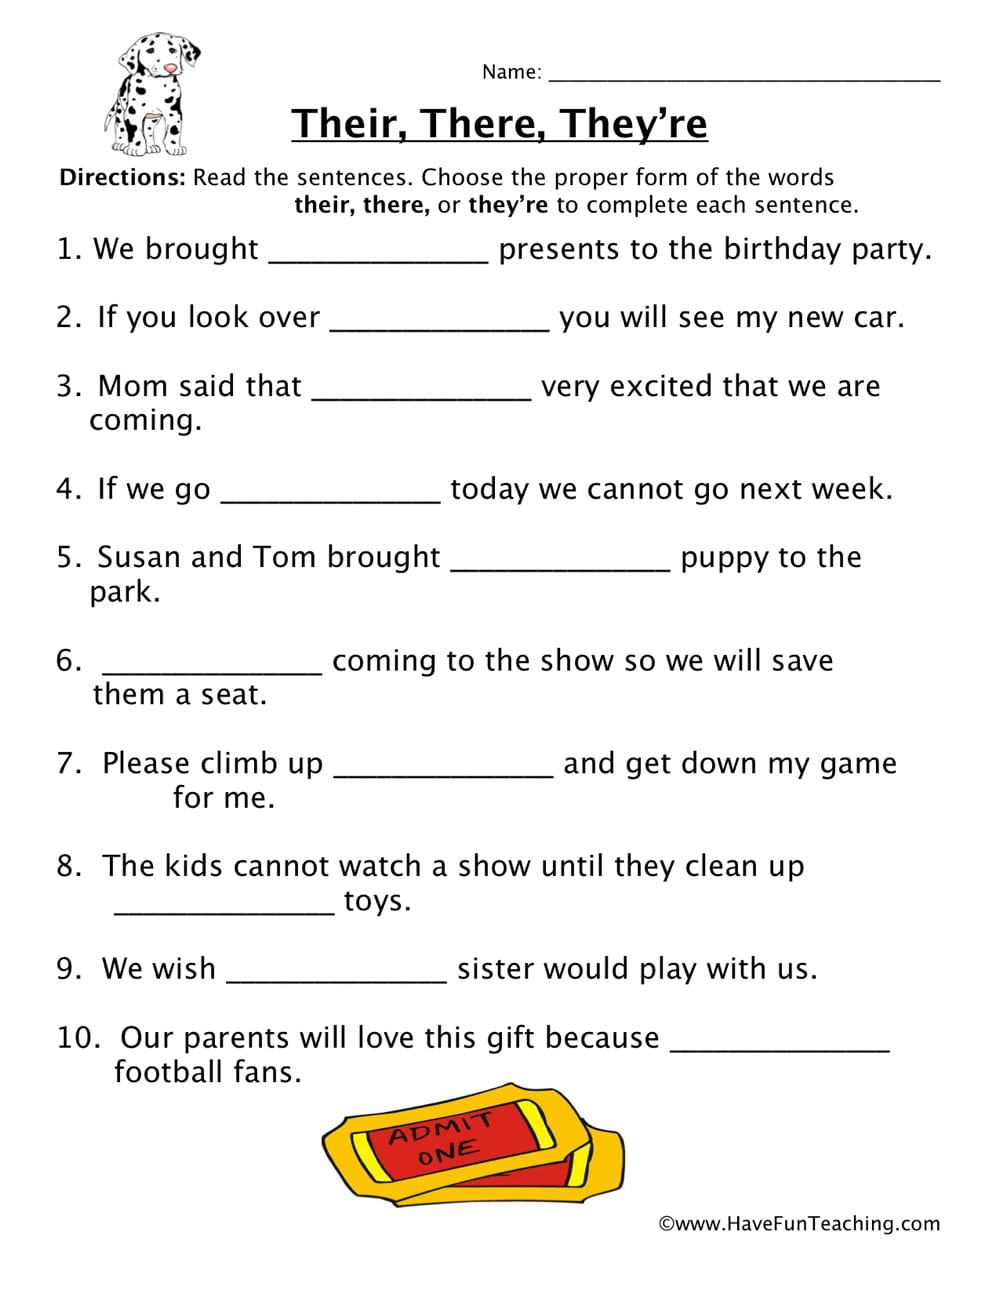 their-there-they-re-homophones-worksheet-have-fun-db-excel